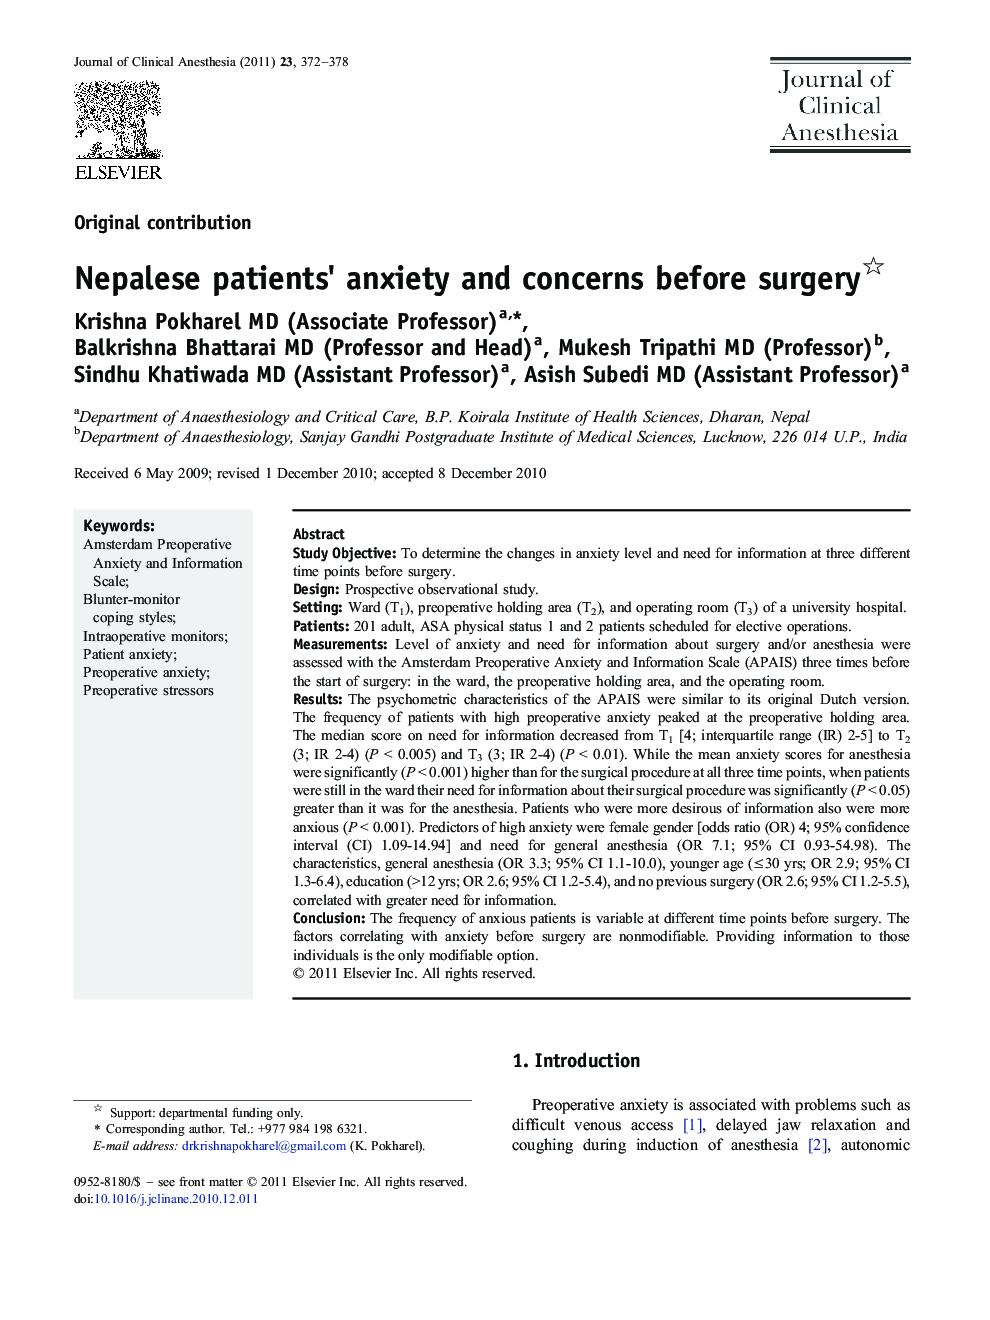 Nepalese patients' anxiety and concerns before surgery 